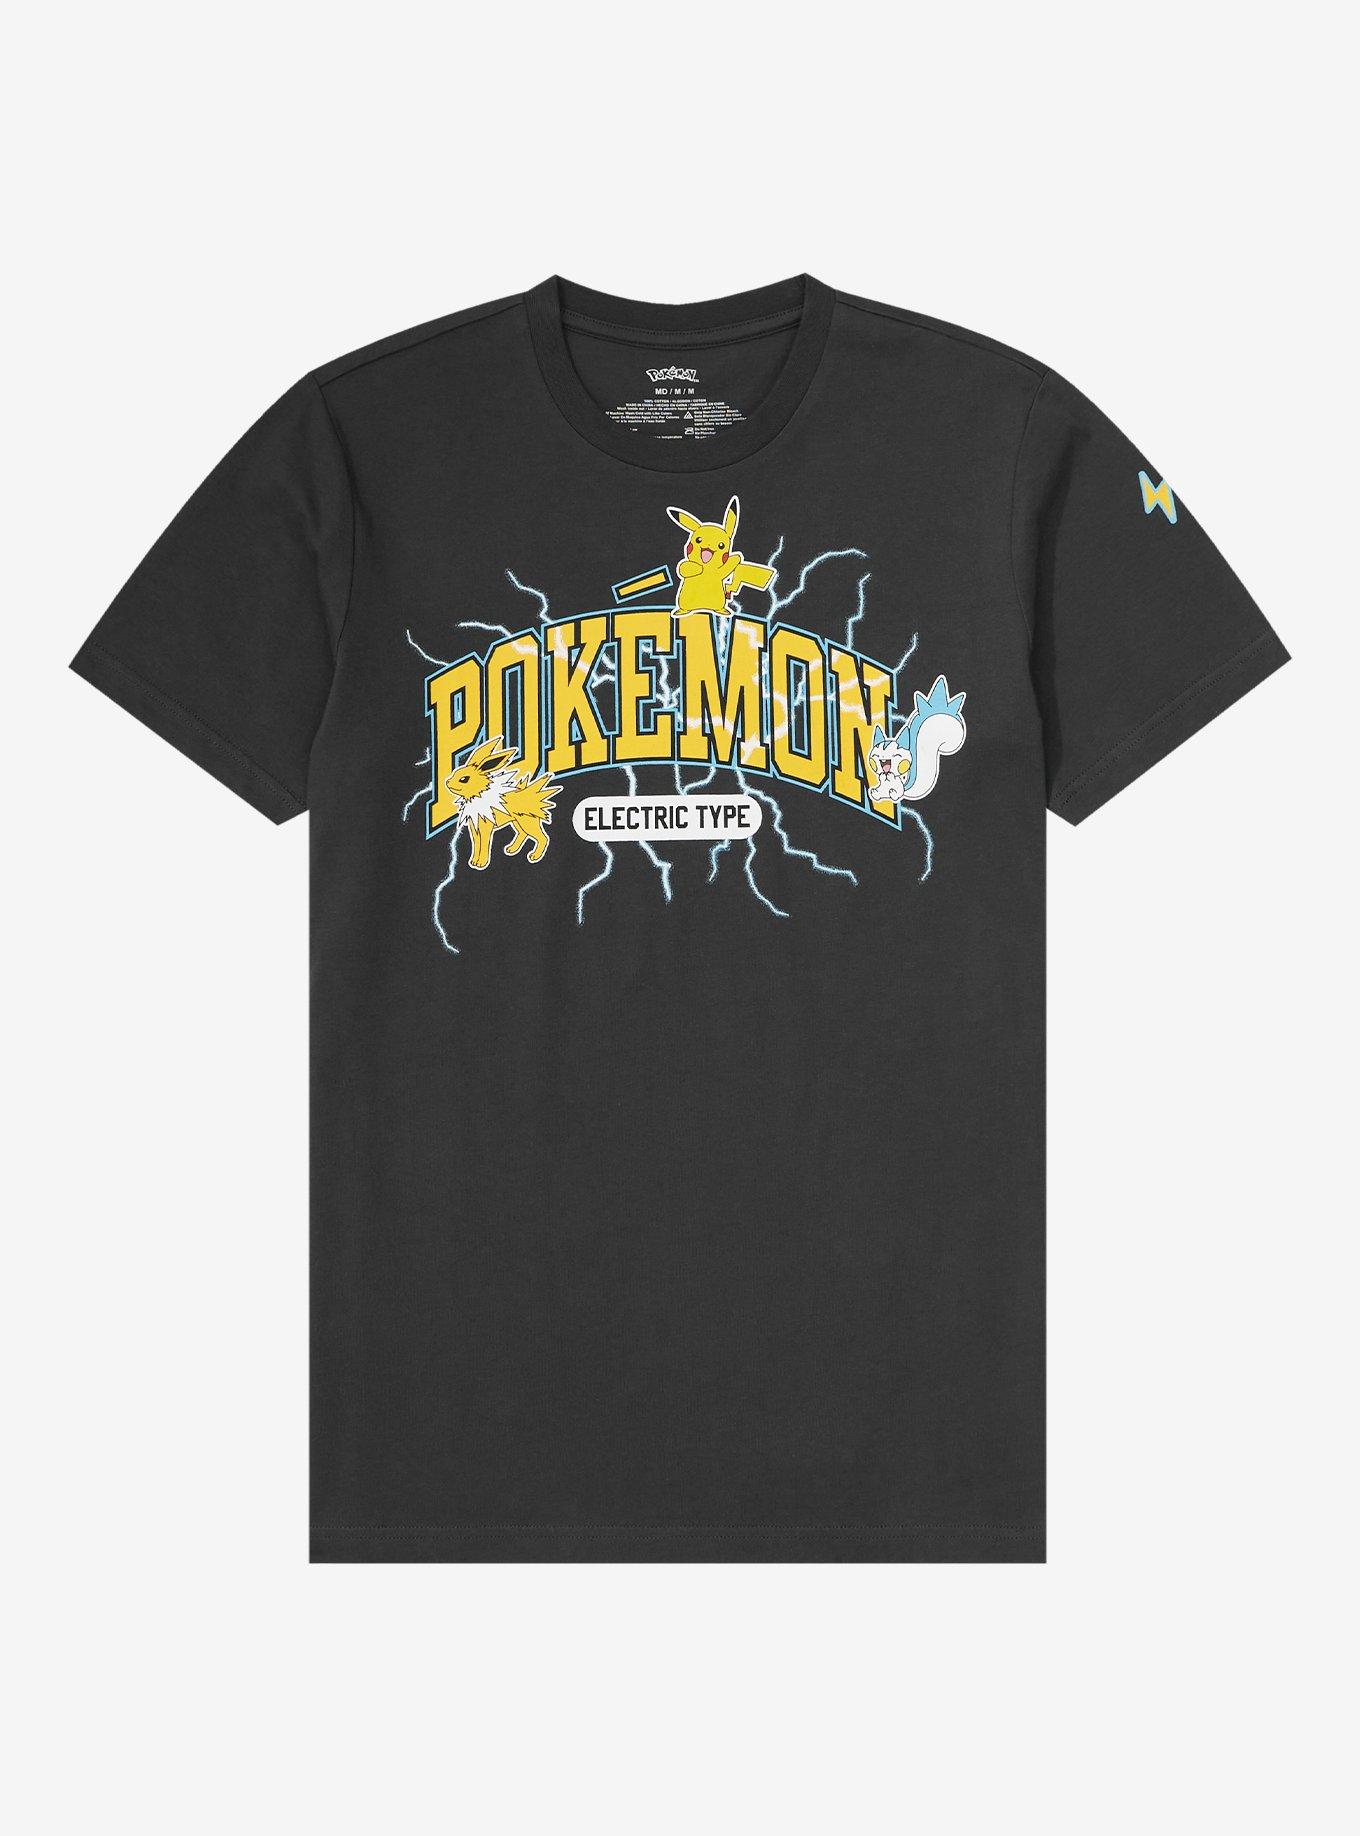 Pokémon Electric Type T-Shirt - BoxLunch Exclusive | BoxLunch